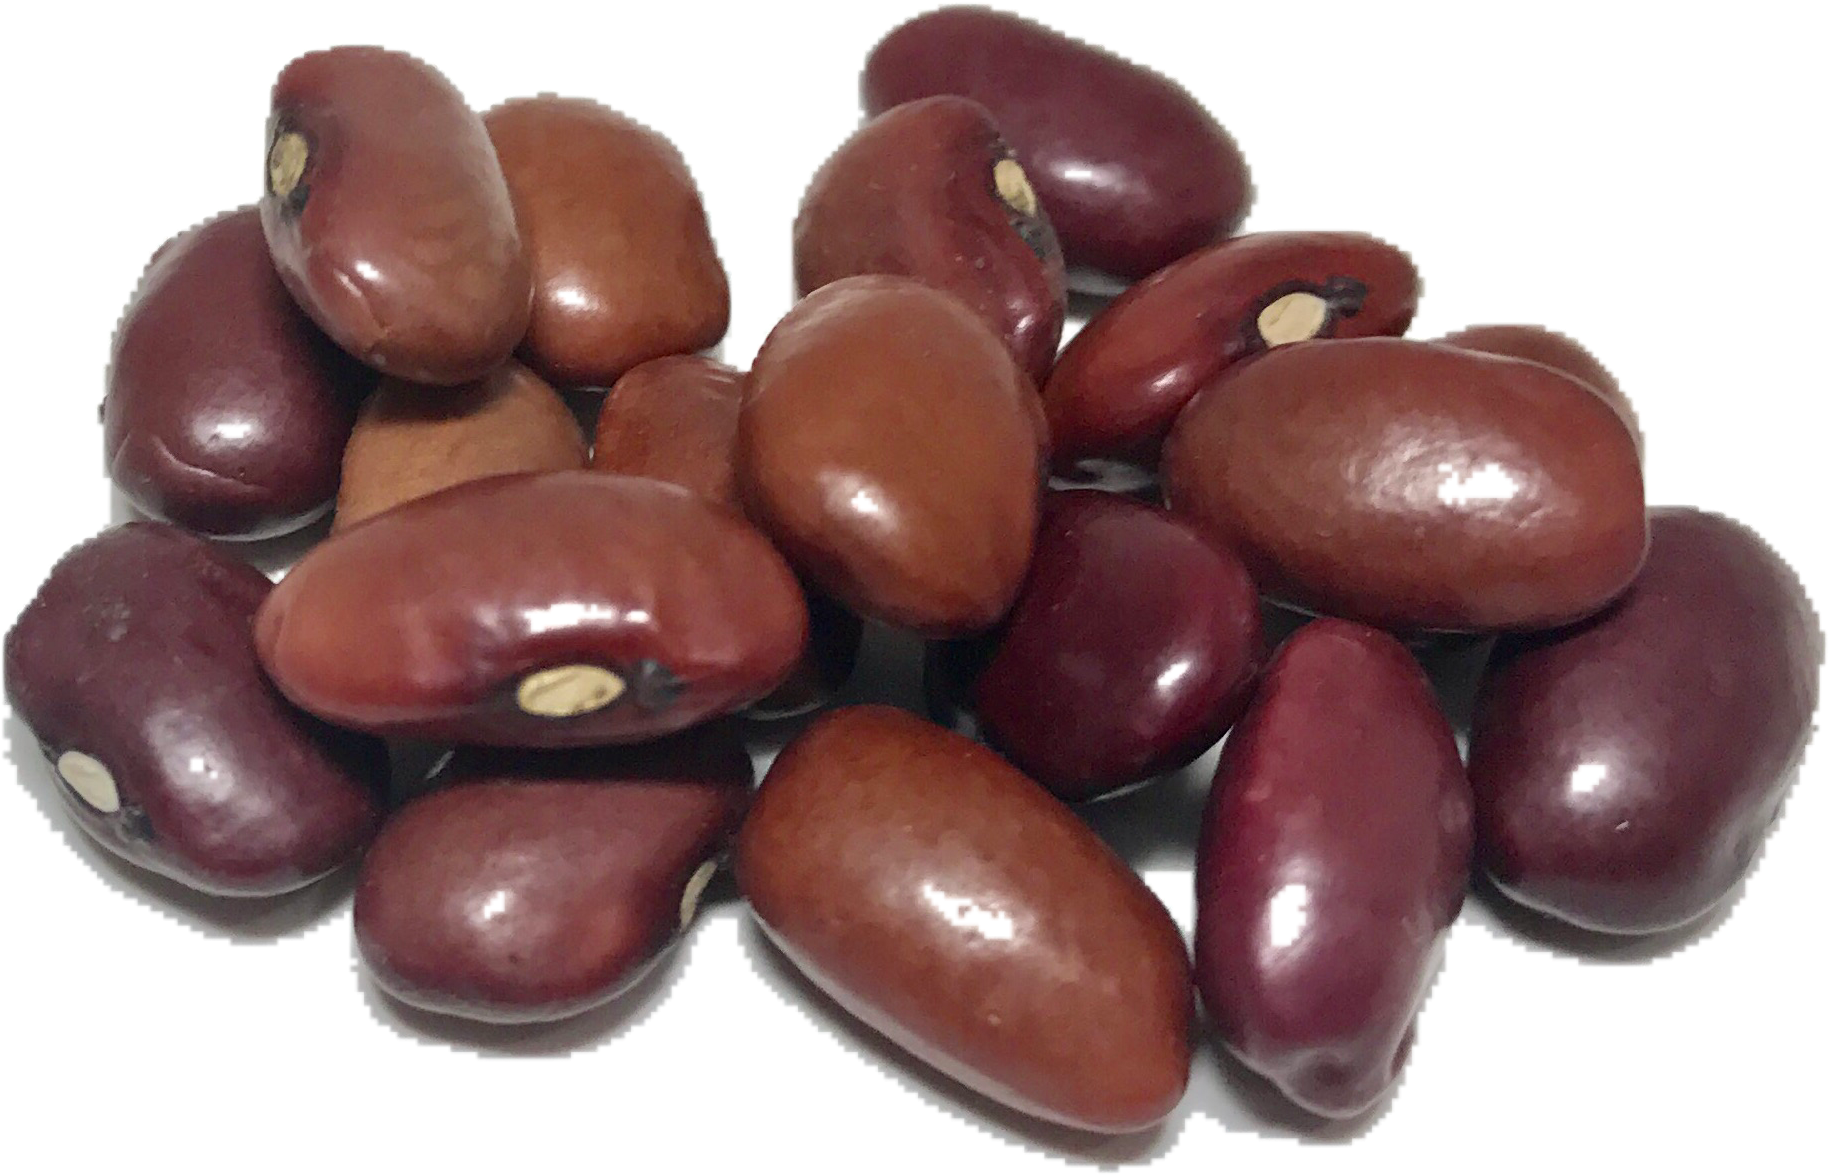 Beans Kidney Free Download Image PNG Image